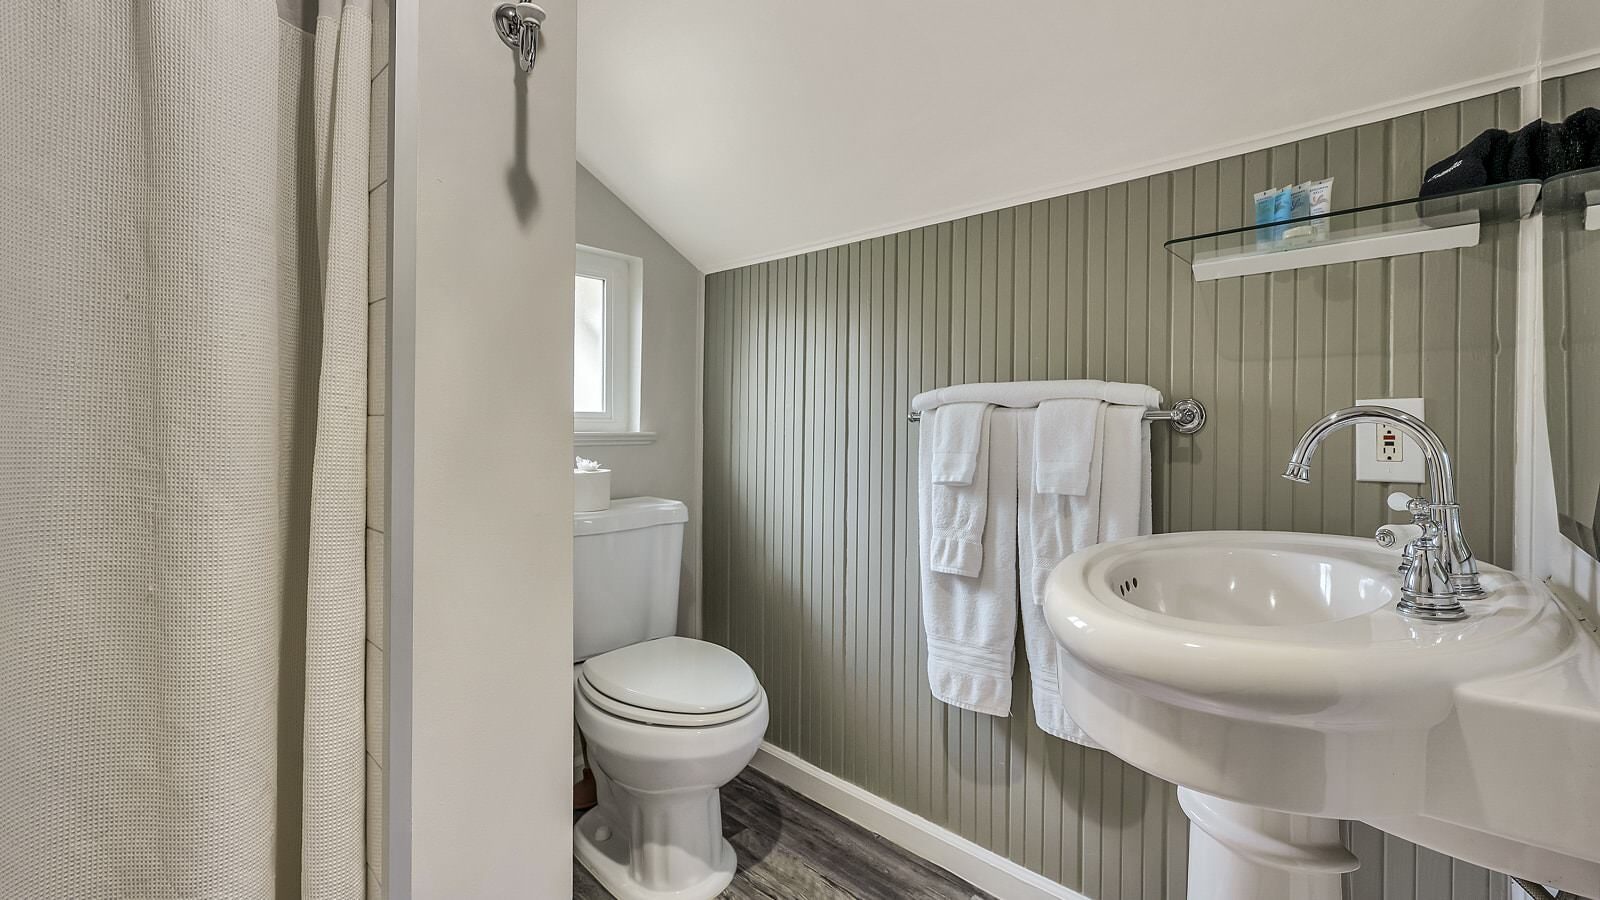 Bathroom with gray and white walls, stand up shower, white toilet, and white sink